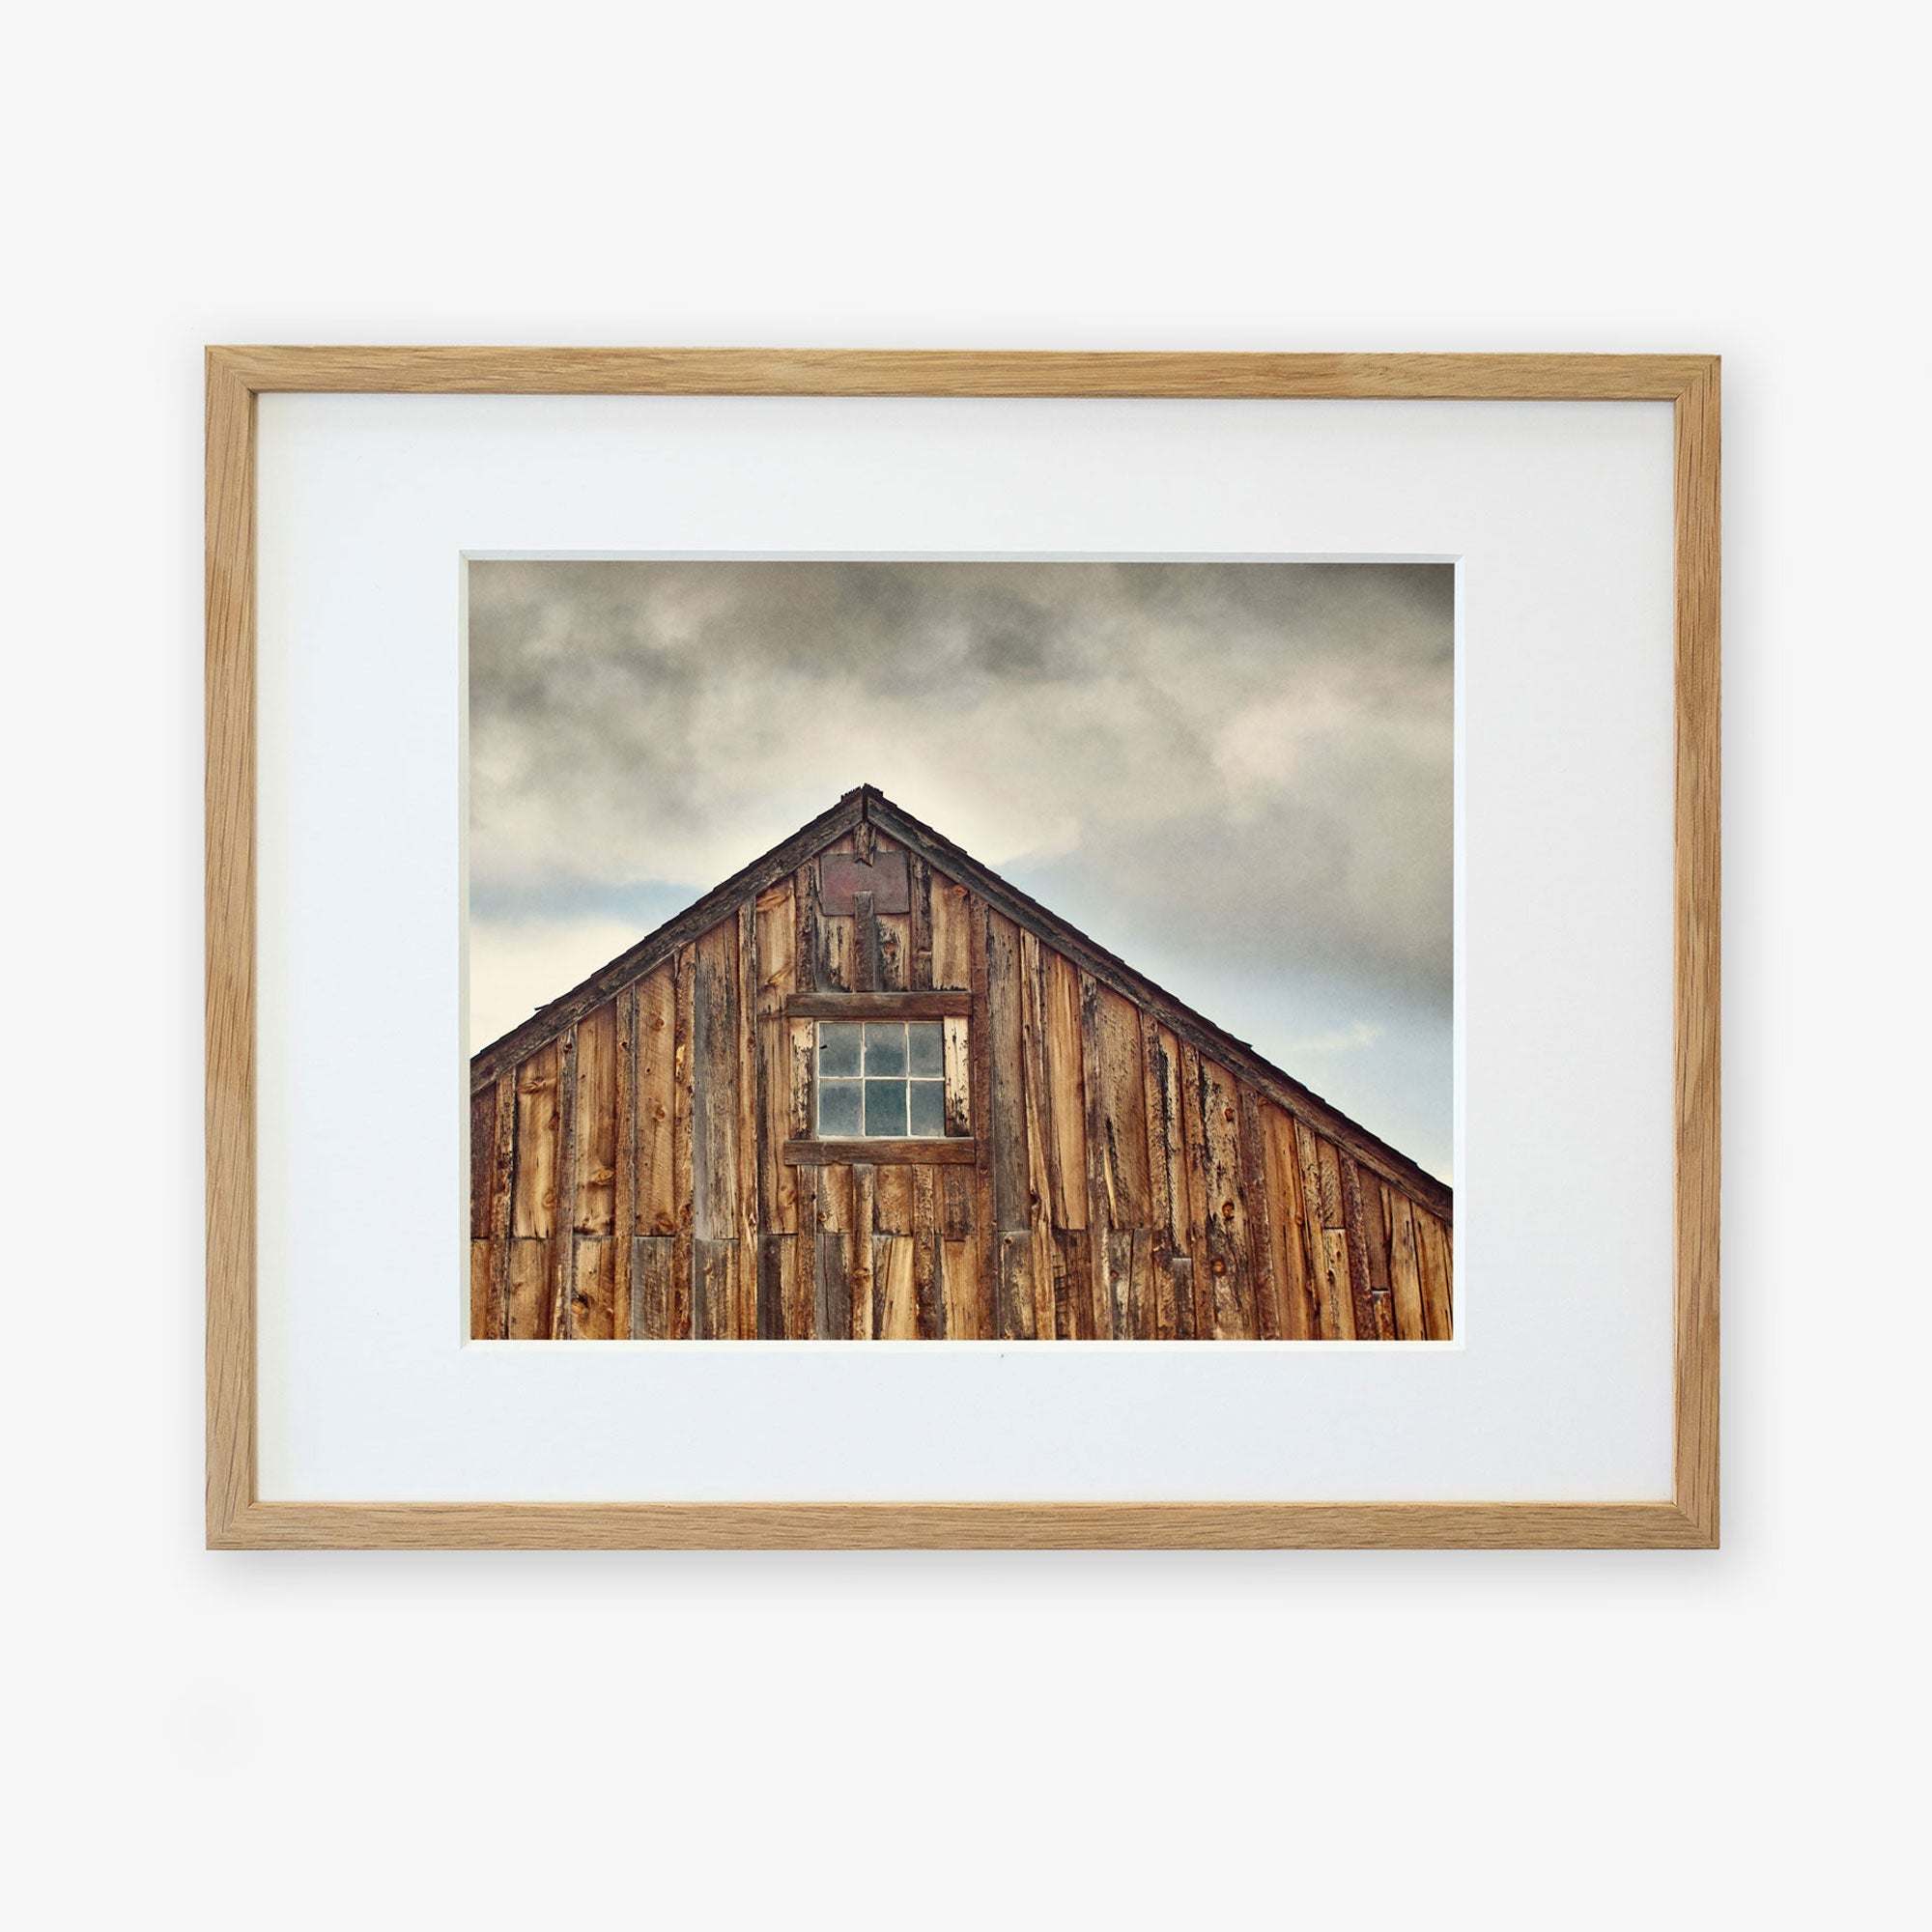 Offley Green&#39;s &#39;Old Barn at Bodie&#39; Farmhouse Rustic Print, emphasizing rustic textures and a single central window, is framed in a simple and light-colored frame printed on archival photographic paper.